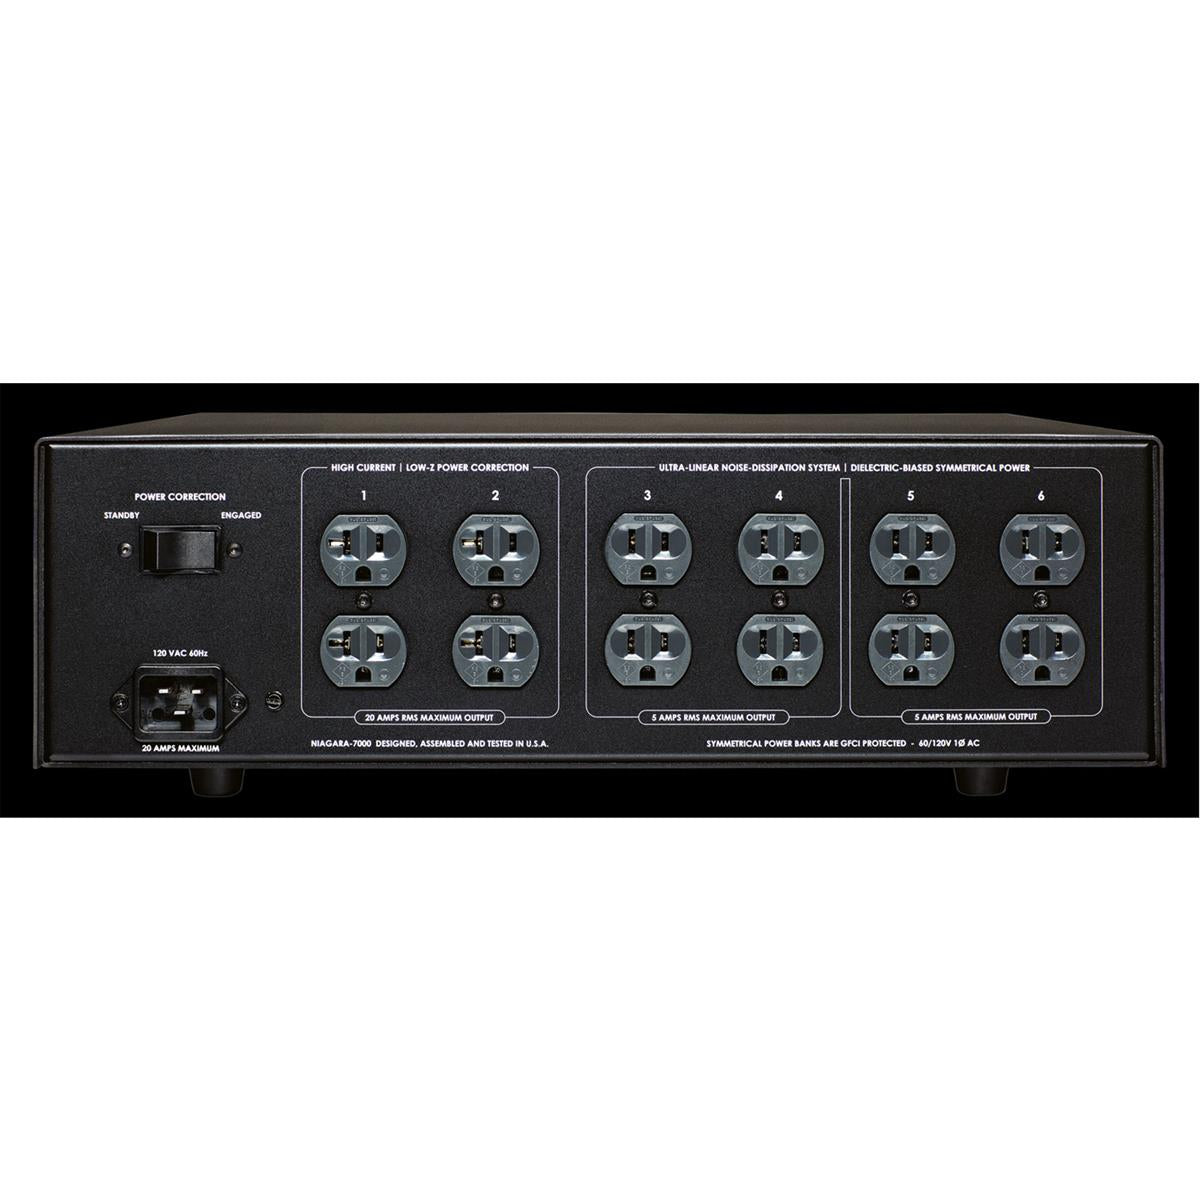 AudioQuest Niagara 7000 Noise-Dissipation System & Power Conditioner